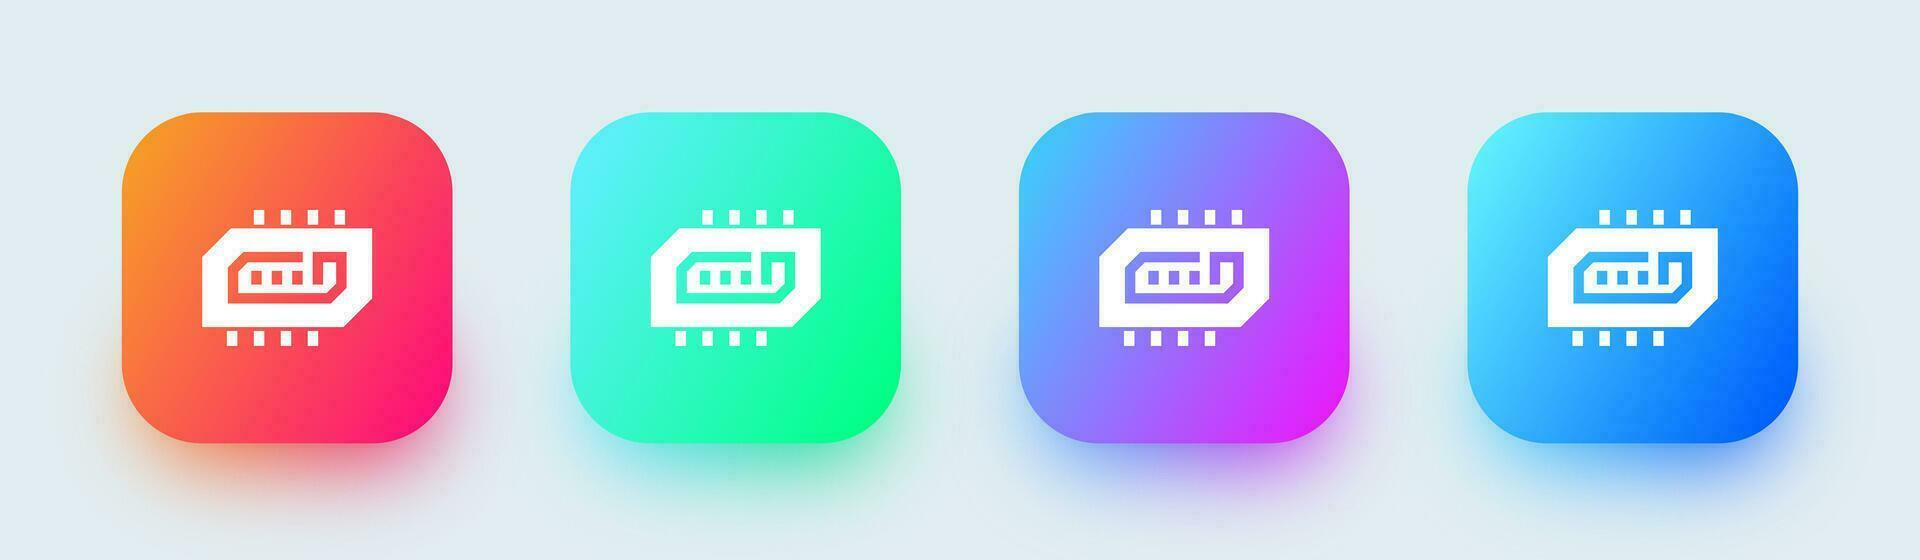 Ram solid icon in square gradient colors. Random access memory signs vector illustration.